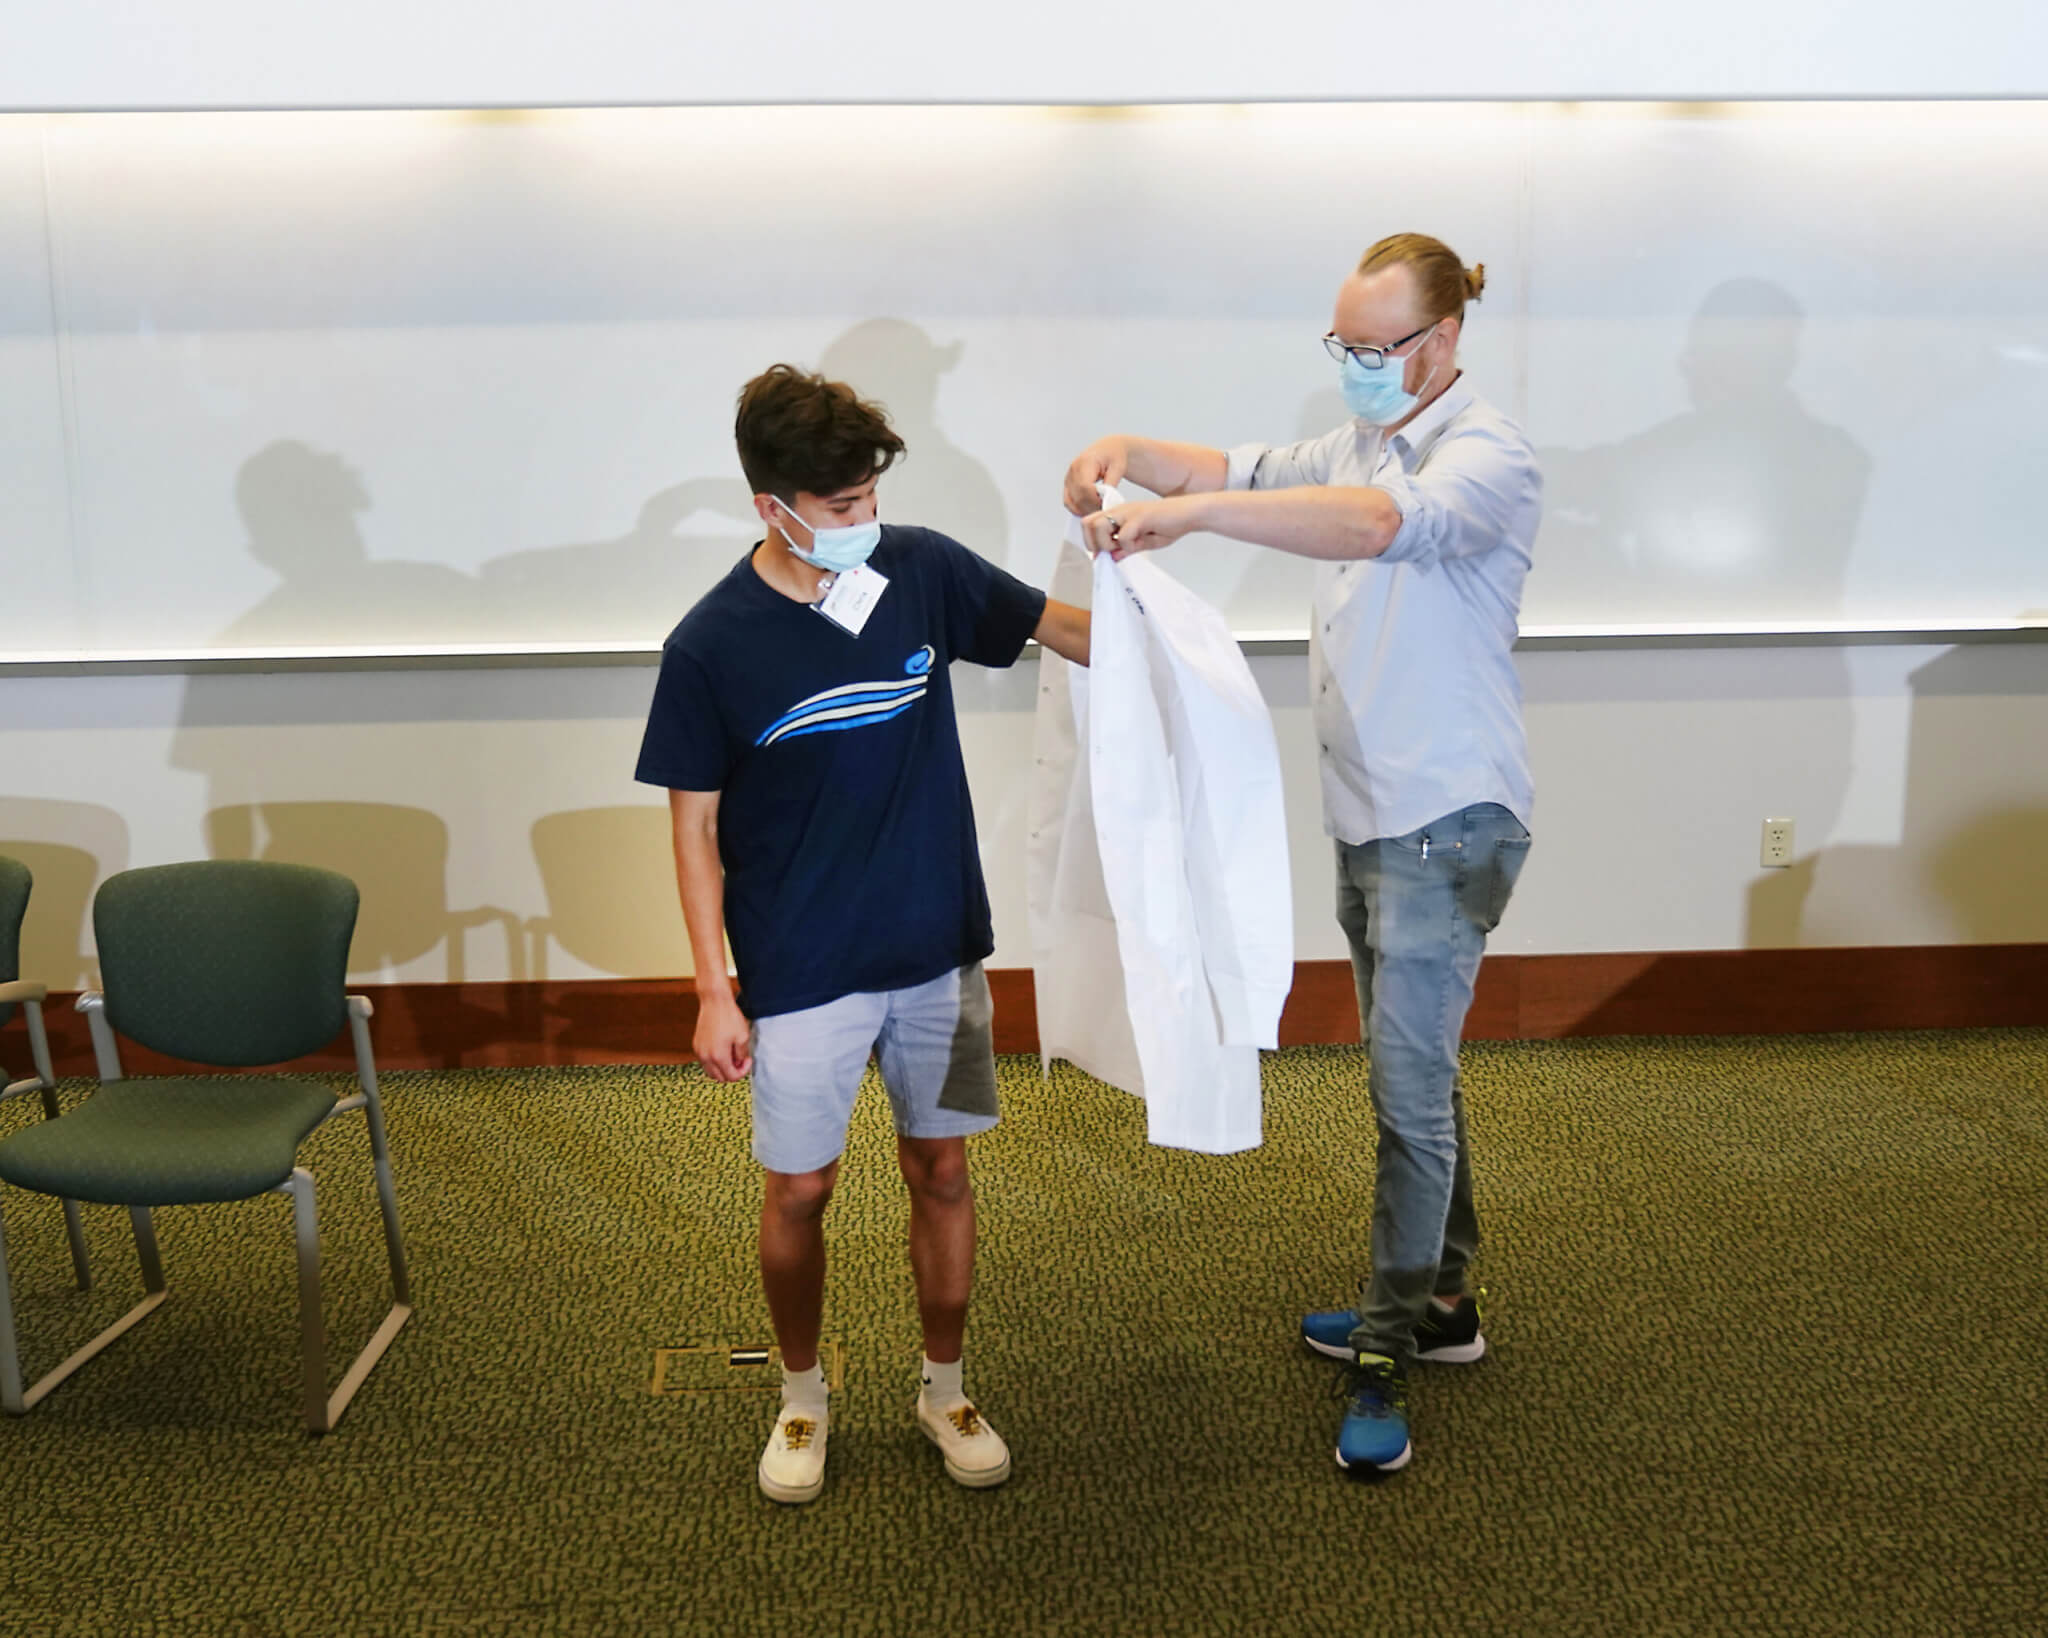 Students received white lab coats at the begining of the week. Photo by Tom Campbell.